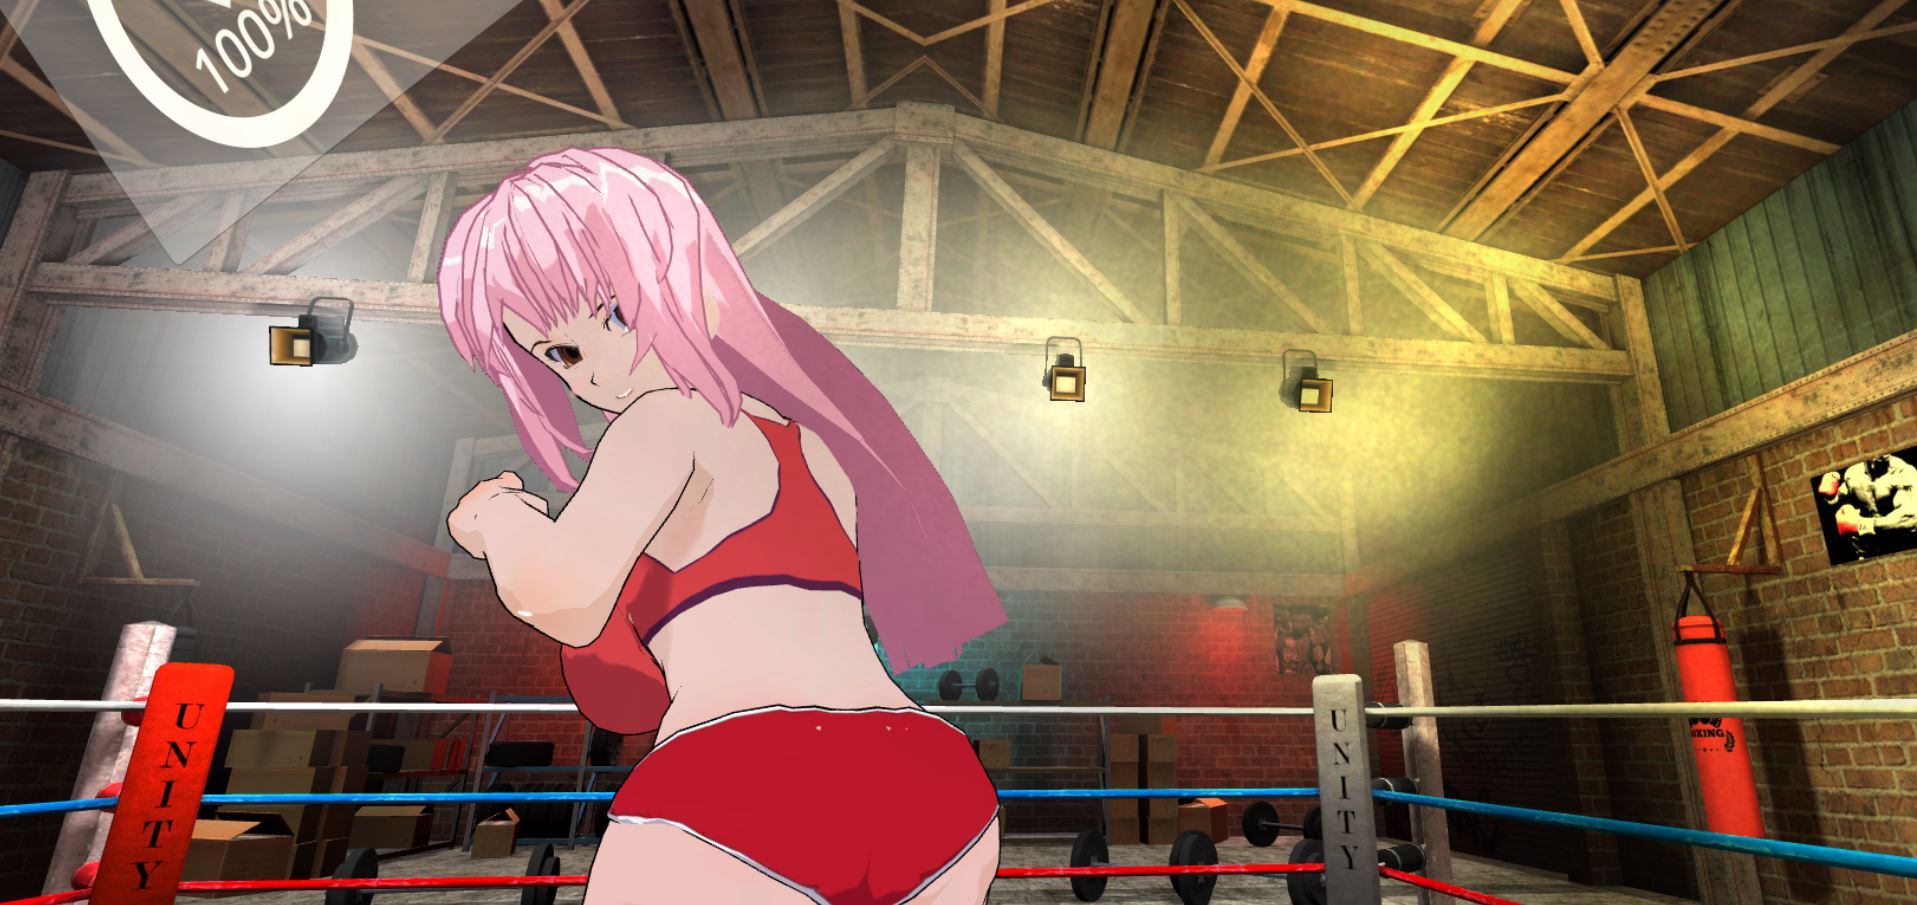 Unity] Hentai Fighters VR - v1.2.0 by muhuhu 18+ Adult xxx Porn Game  Download